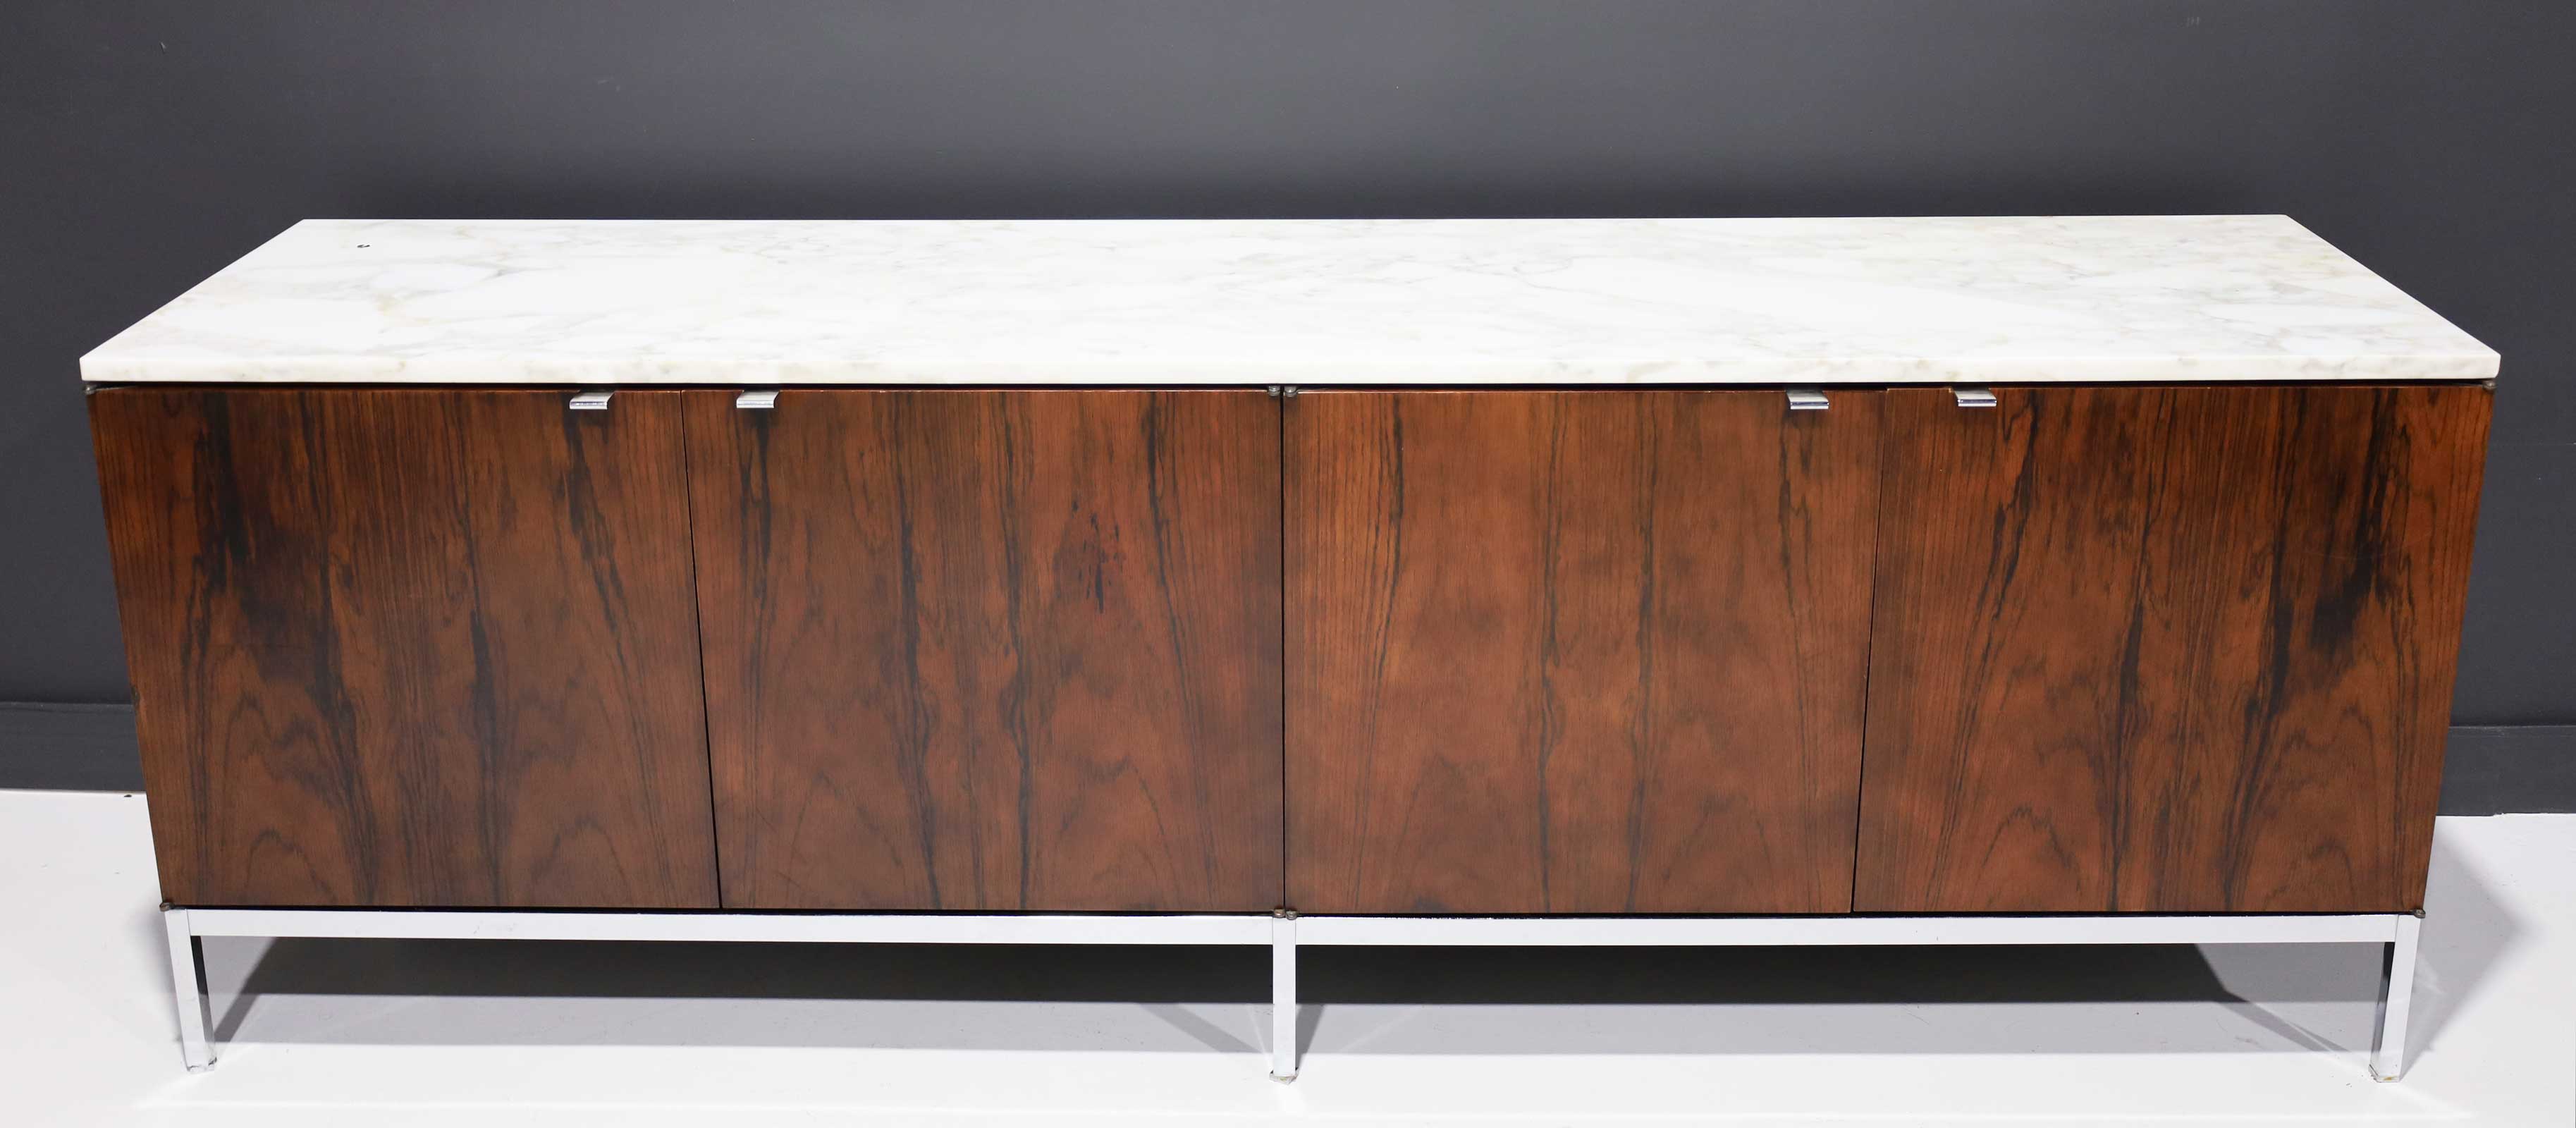 Florence Knoll's iconic sideboard/credenza in rosewood with calacutta marble top. The sideboard features 4 bays with internal shelving in each bay. Key not available. In beautiful condition with no issues. 1960s. From a prominent single owner